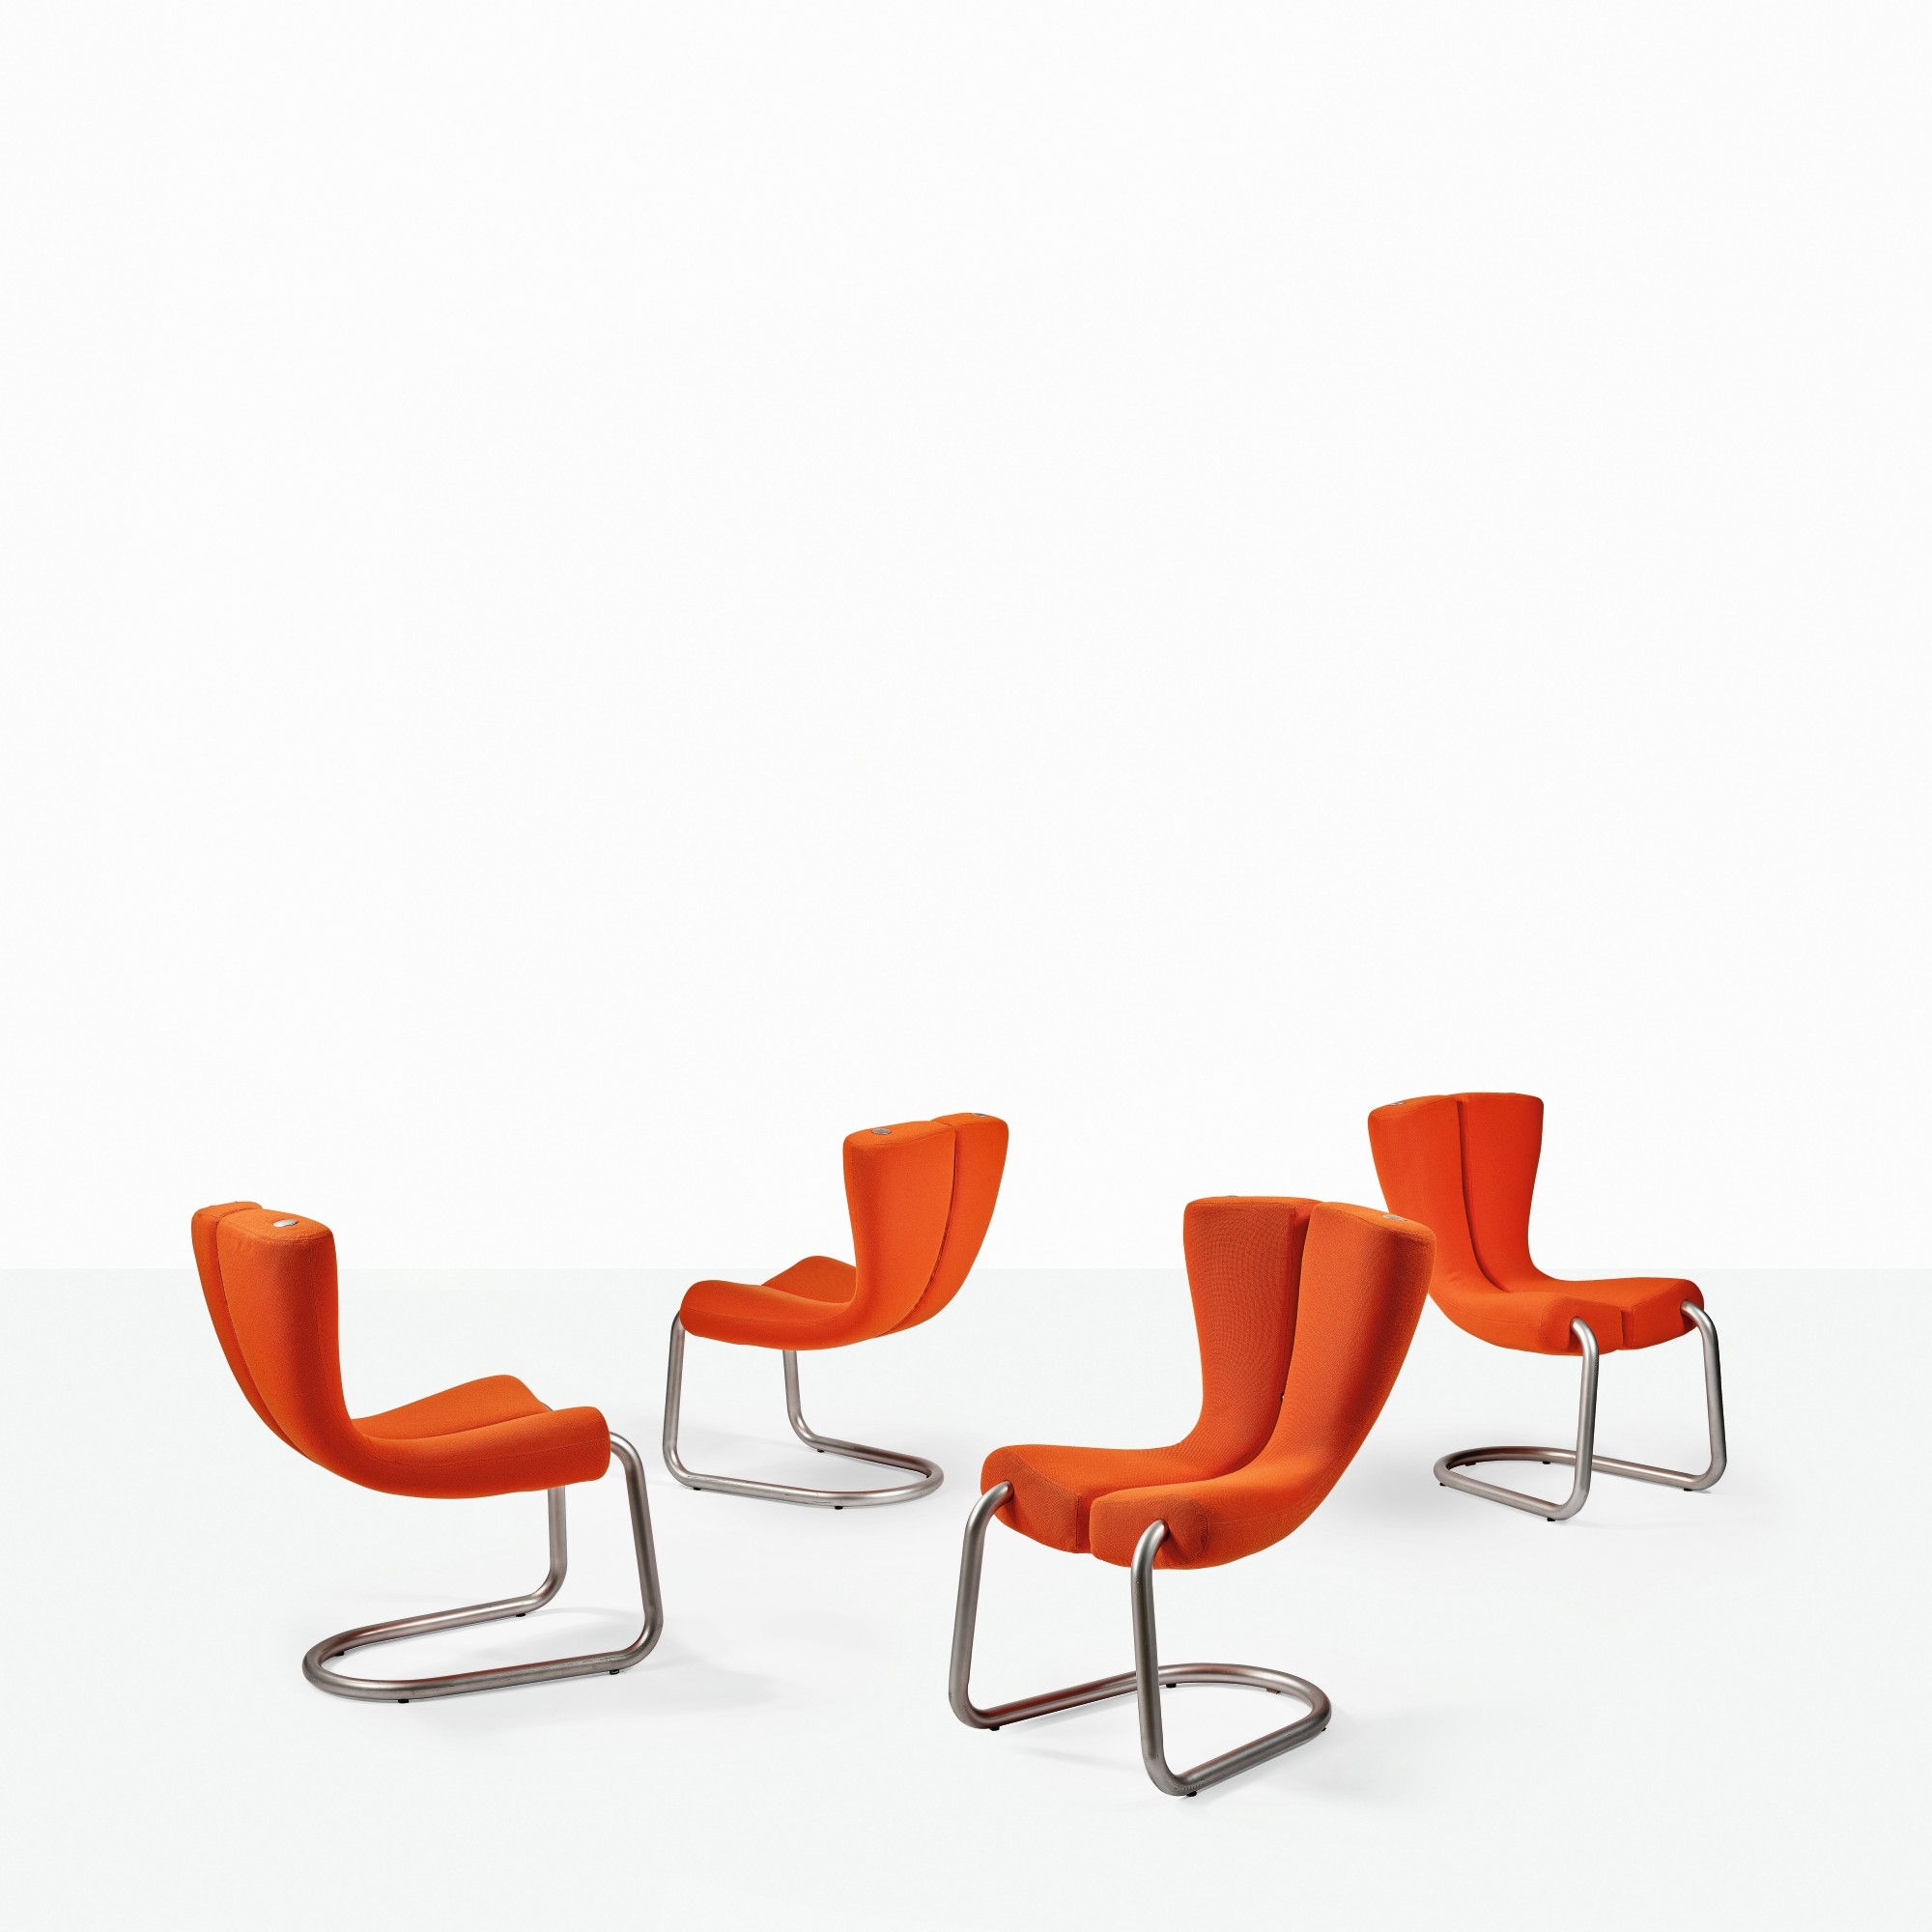 MARC NEWSON, SET OF FOUR KOMED CHAIRS, Design, 20th Century Design